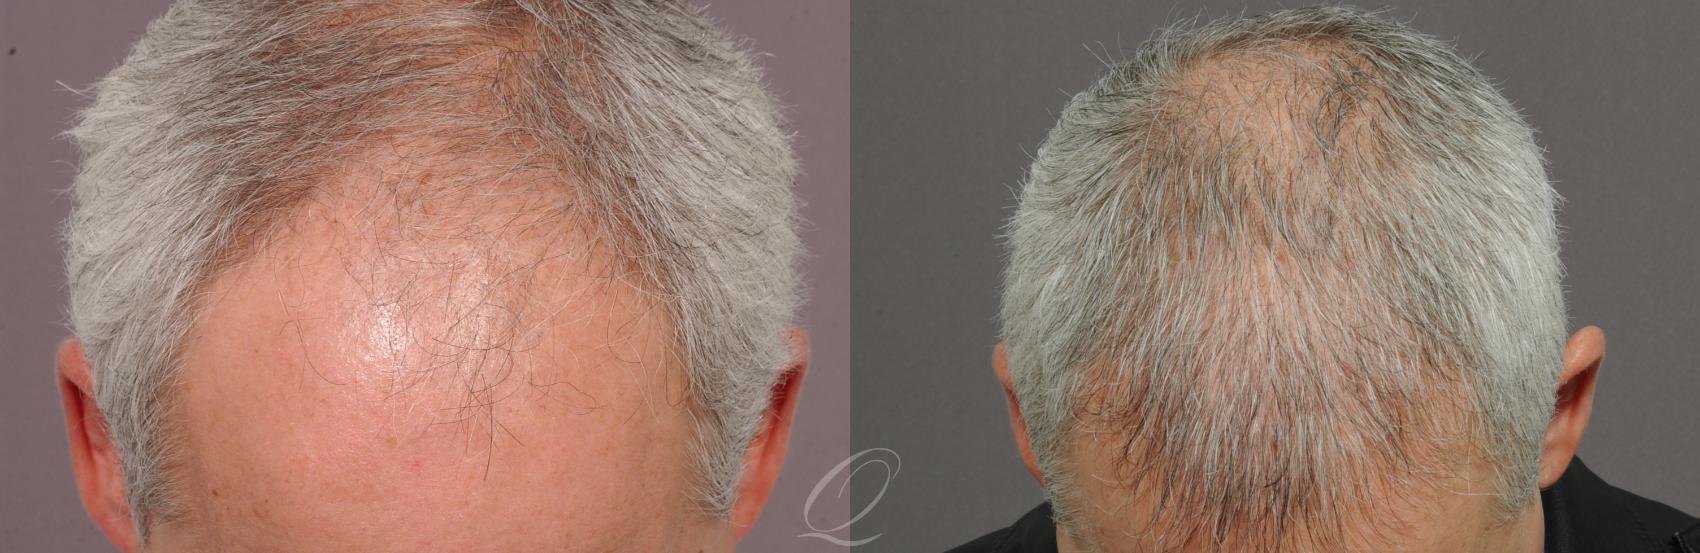 FUT Case 1043 Before & After View #1 | Rochester, NY | Quatela Center for Hair Restoration